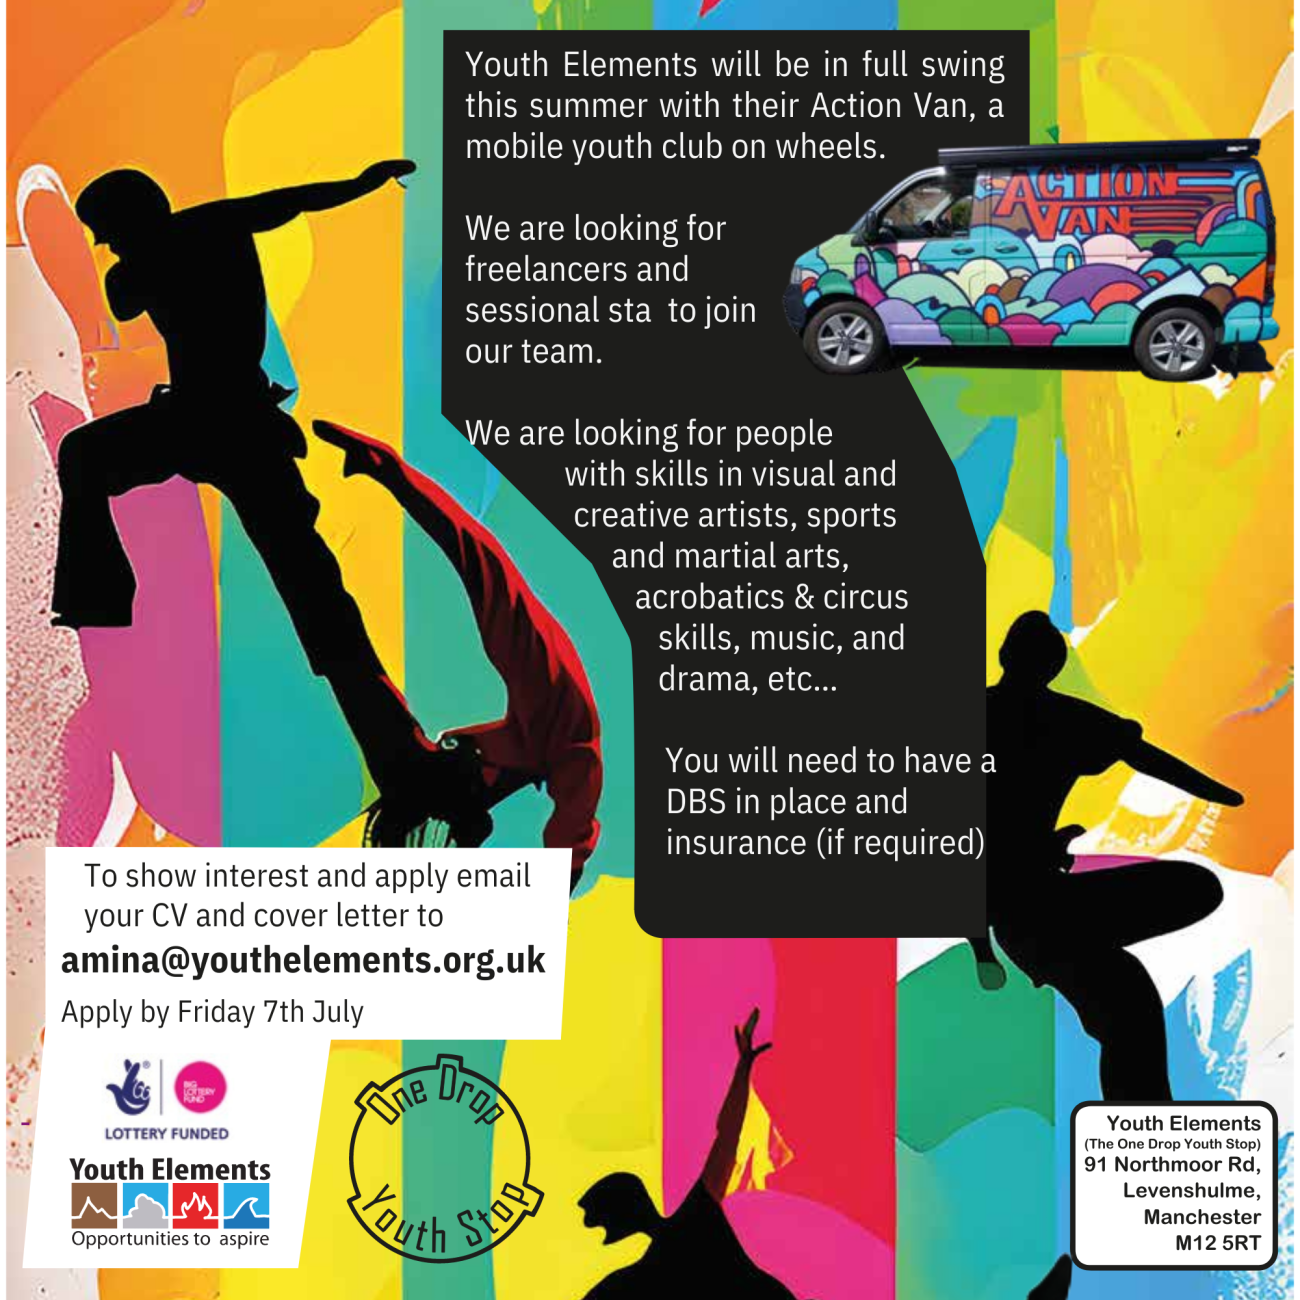 Youth Elements will be in full swing this summer with their Action Van, a mobile youth club on wheels. Youth Elements are looking for freelancers and sessional sta¬ff to join their team. Youth Elements are looking for people with skills in visual and creative artists, sports and martial arts, acrobatics and circus skills, music, and drama, etc…  You will need to have a DBS in place and insurance (if required).  To express an interest and apply email your CV and cover letter to amina@youthelements.org.uk by Friday 7 July 2023. 